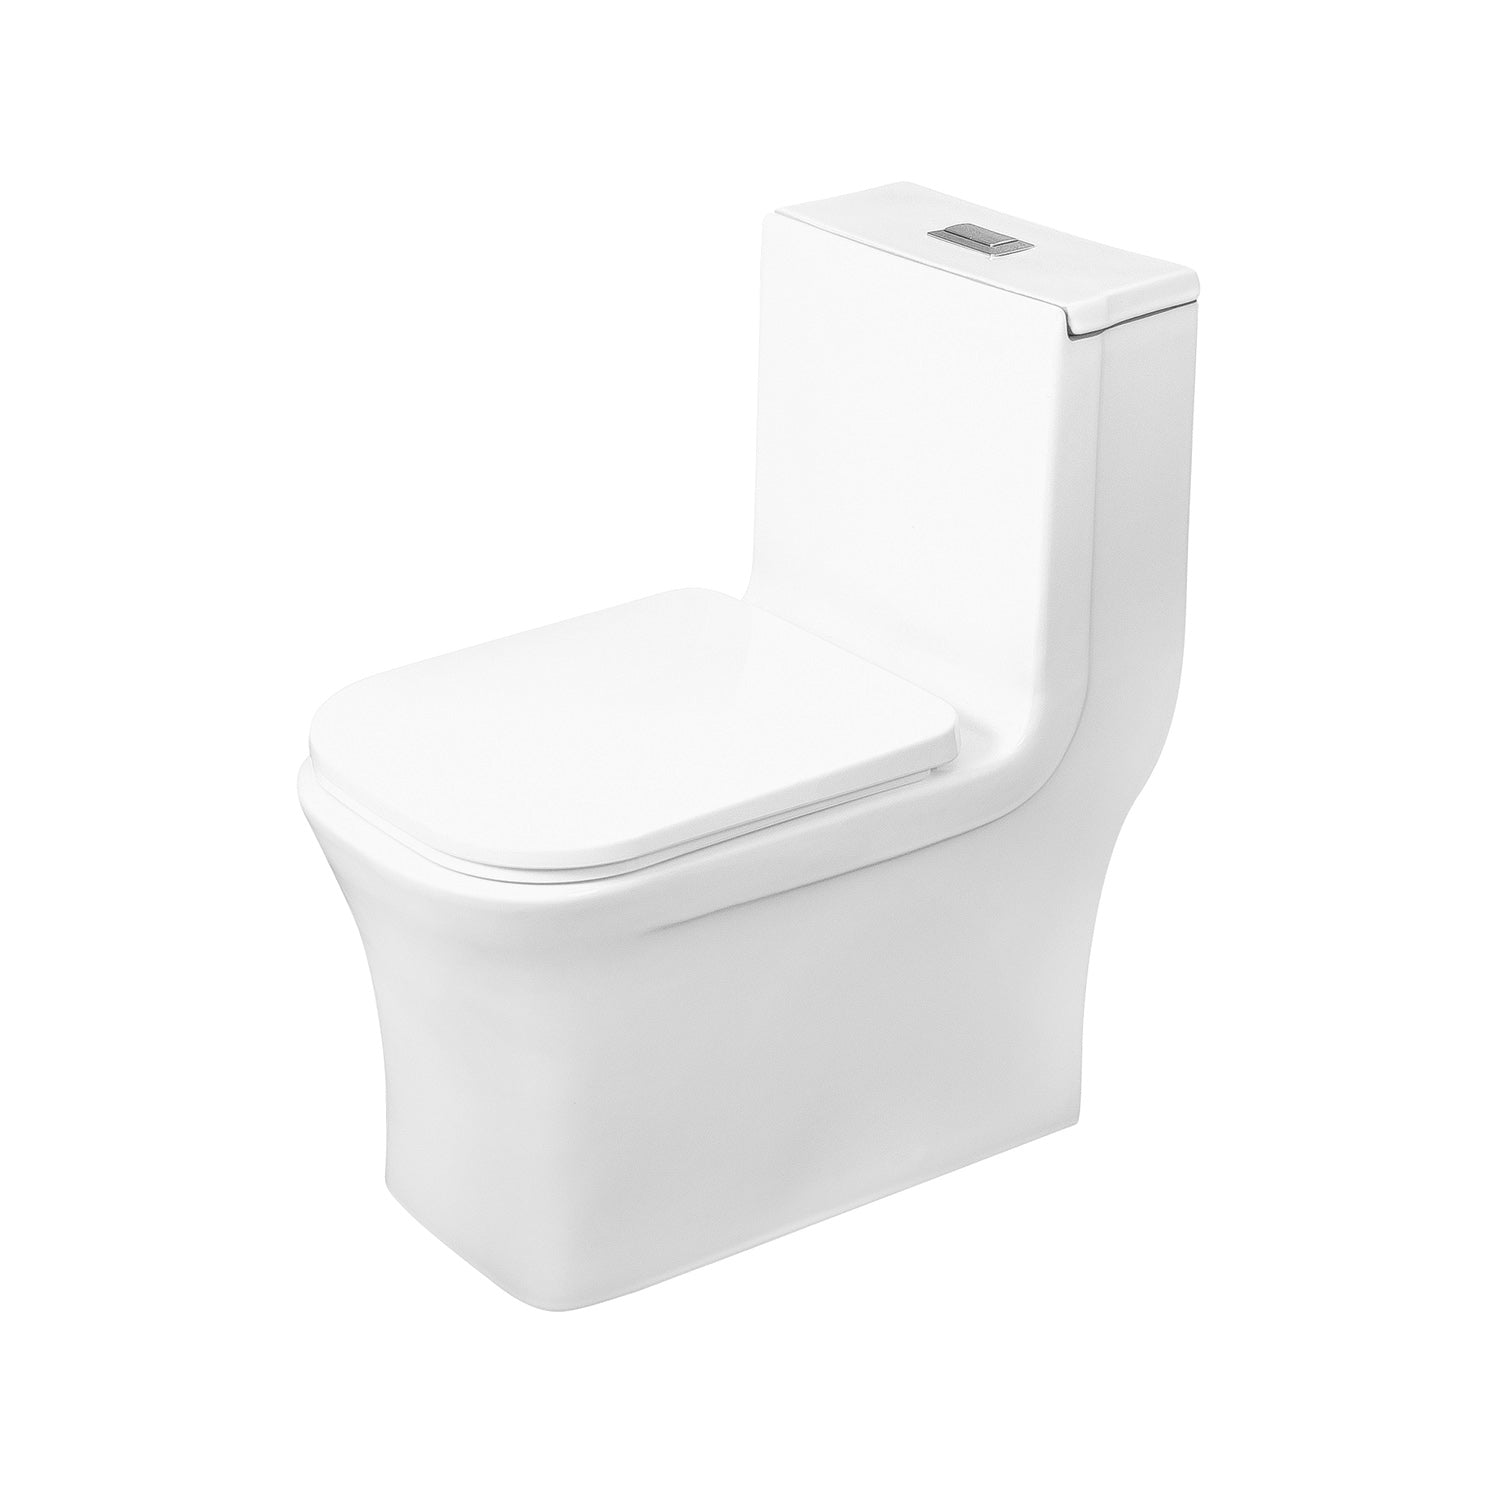 DAX One Piece Square Toilet with Soft Closing Seat and Dual Flush High-Efficiency, Porcelain, White Finish, Height 28-3/4 Inches (BSN-835)